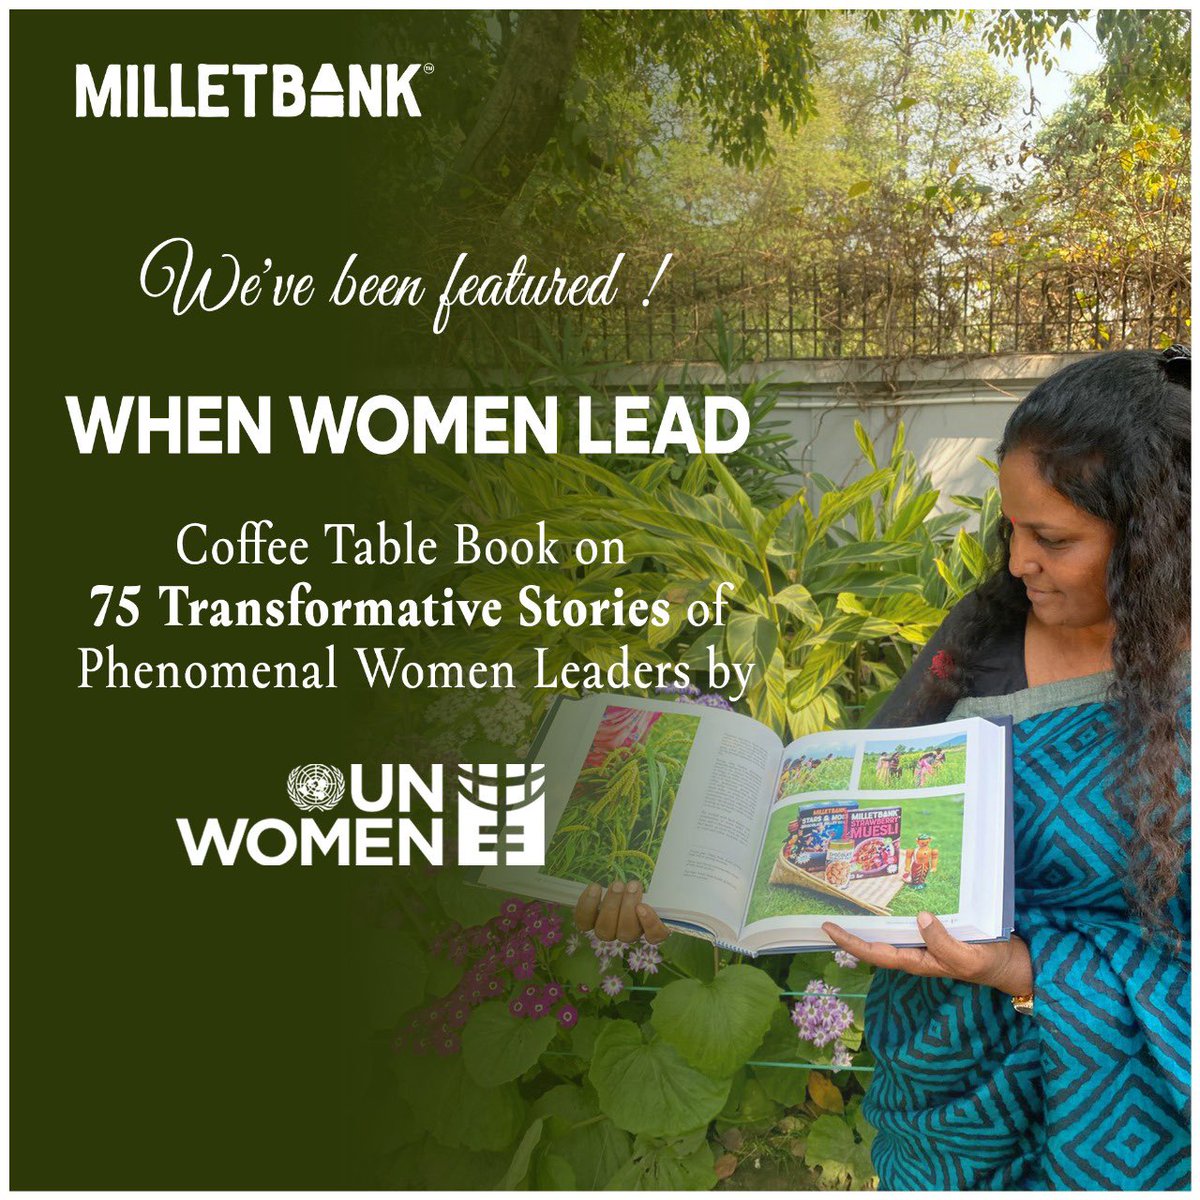 Our story gets featured 'When Women Lead,' a coffee table book featuring 75 transformative stories of phenomenal women by @unwomenindia ! A proud acknowledgment of our efforts as we persist in the Millets' revival!